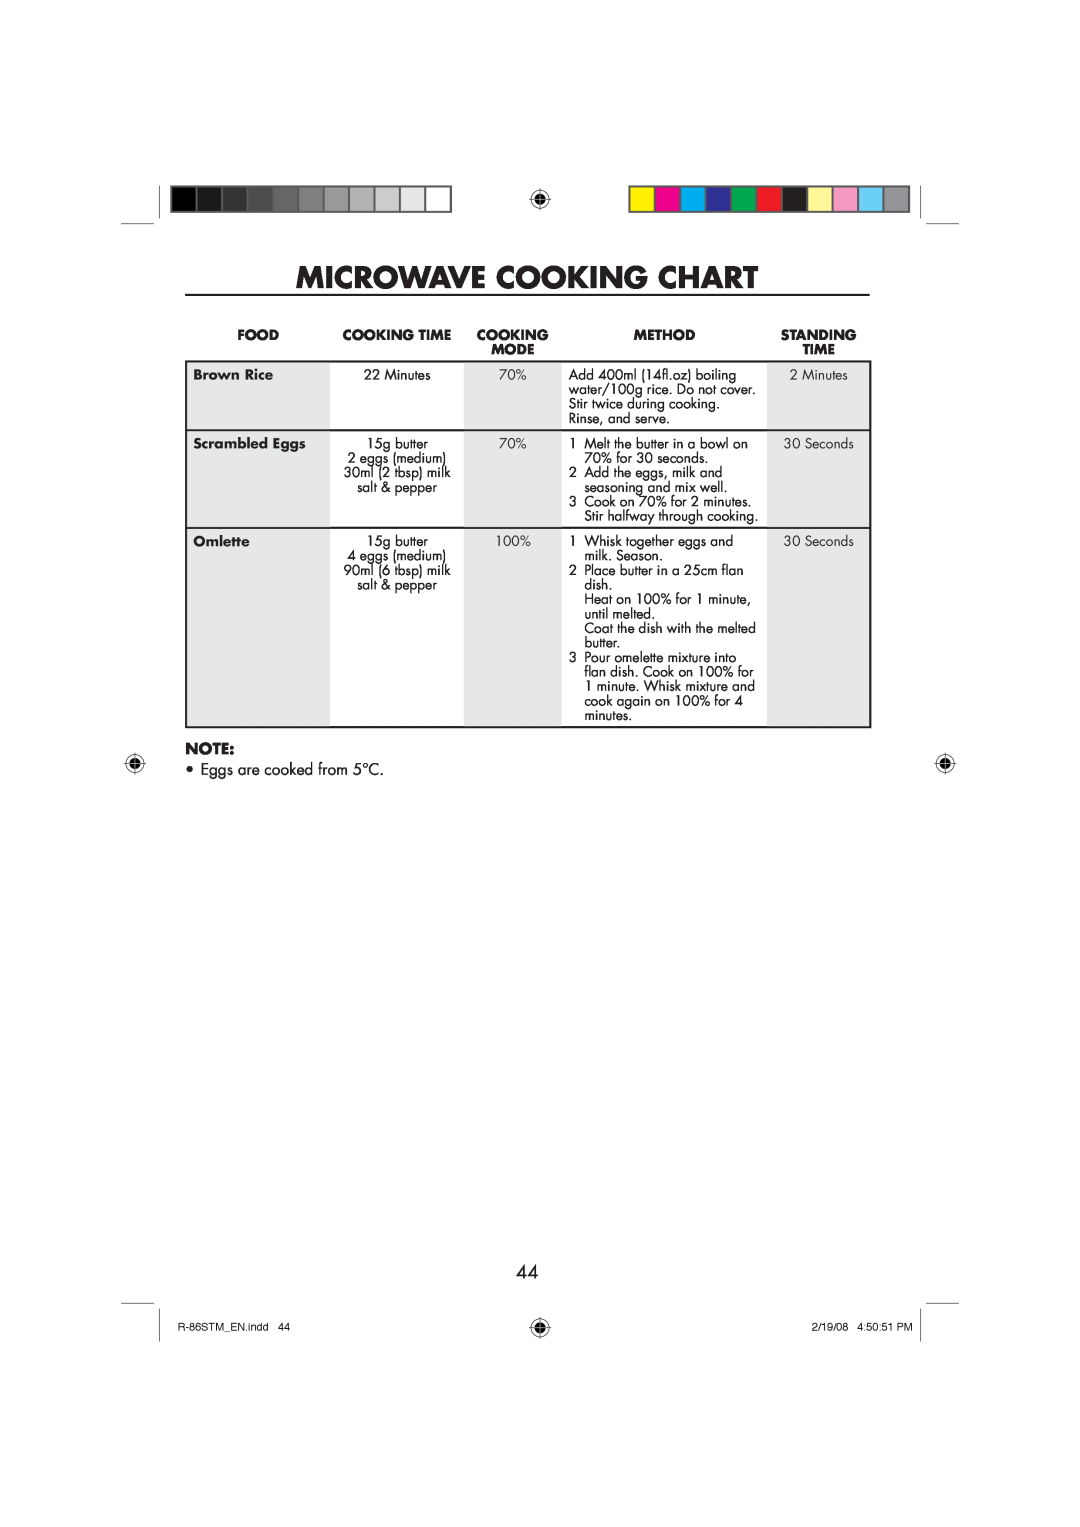 Sharp R-86STM manual Microwave Cooking Chart, Eggs are cooked from 5C 